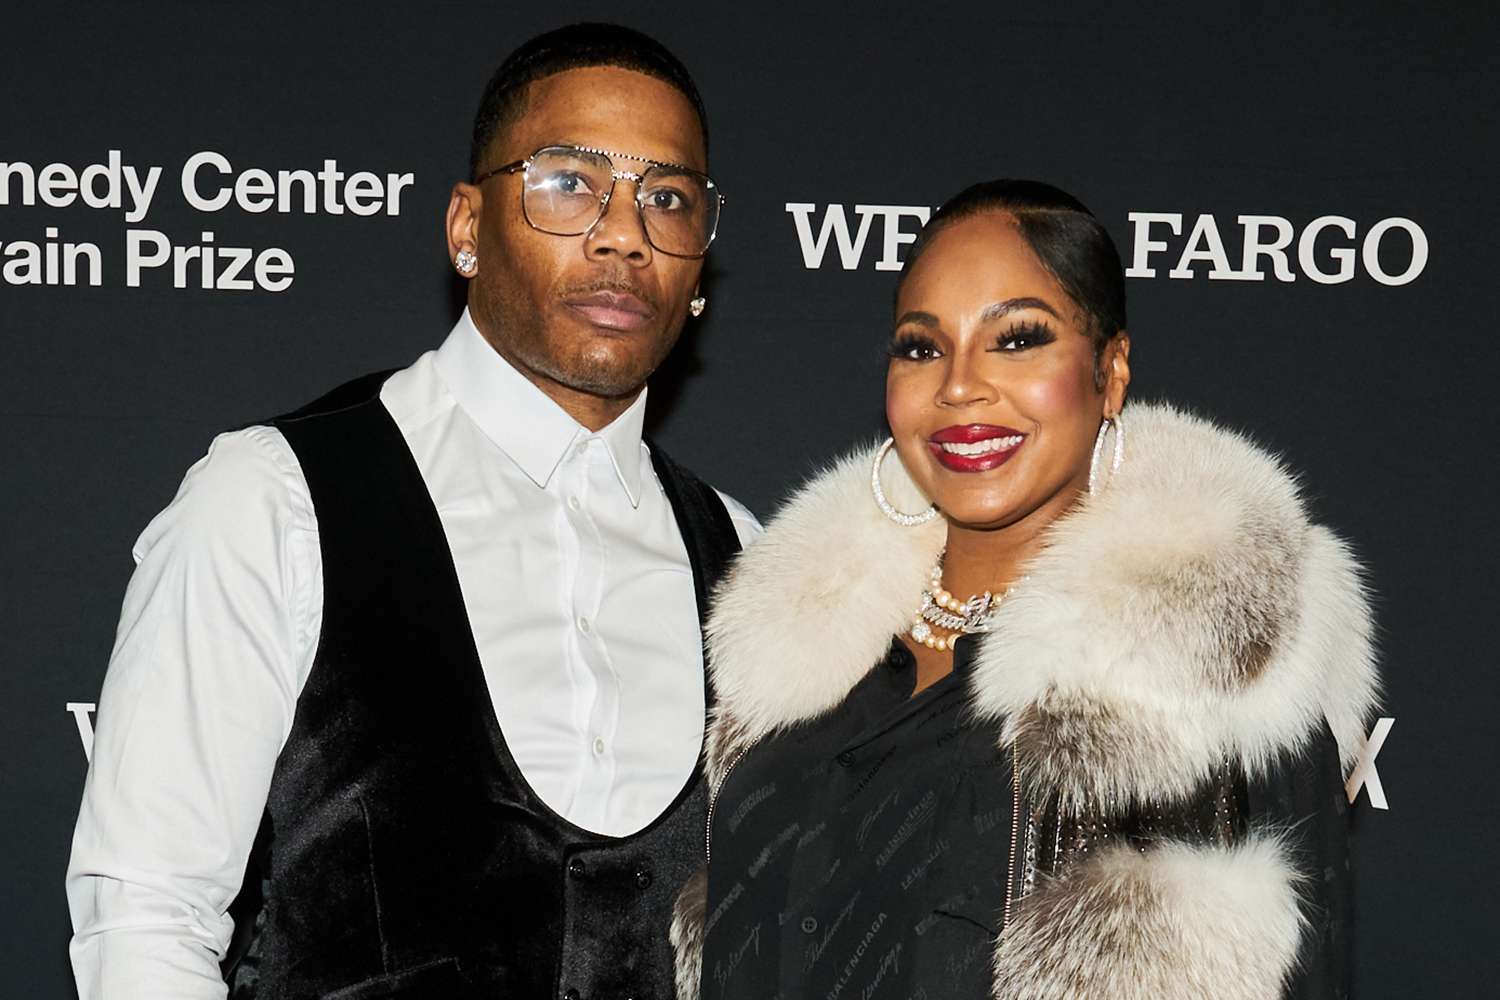 Ashanti Opens Up About Surprise Proposal from Nelly and Planning Her Dream Wedding!